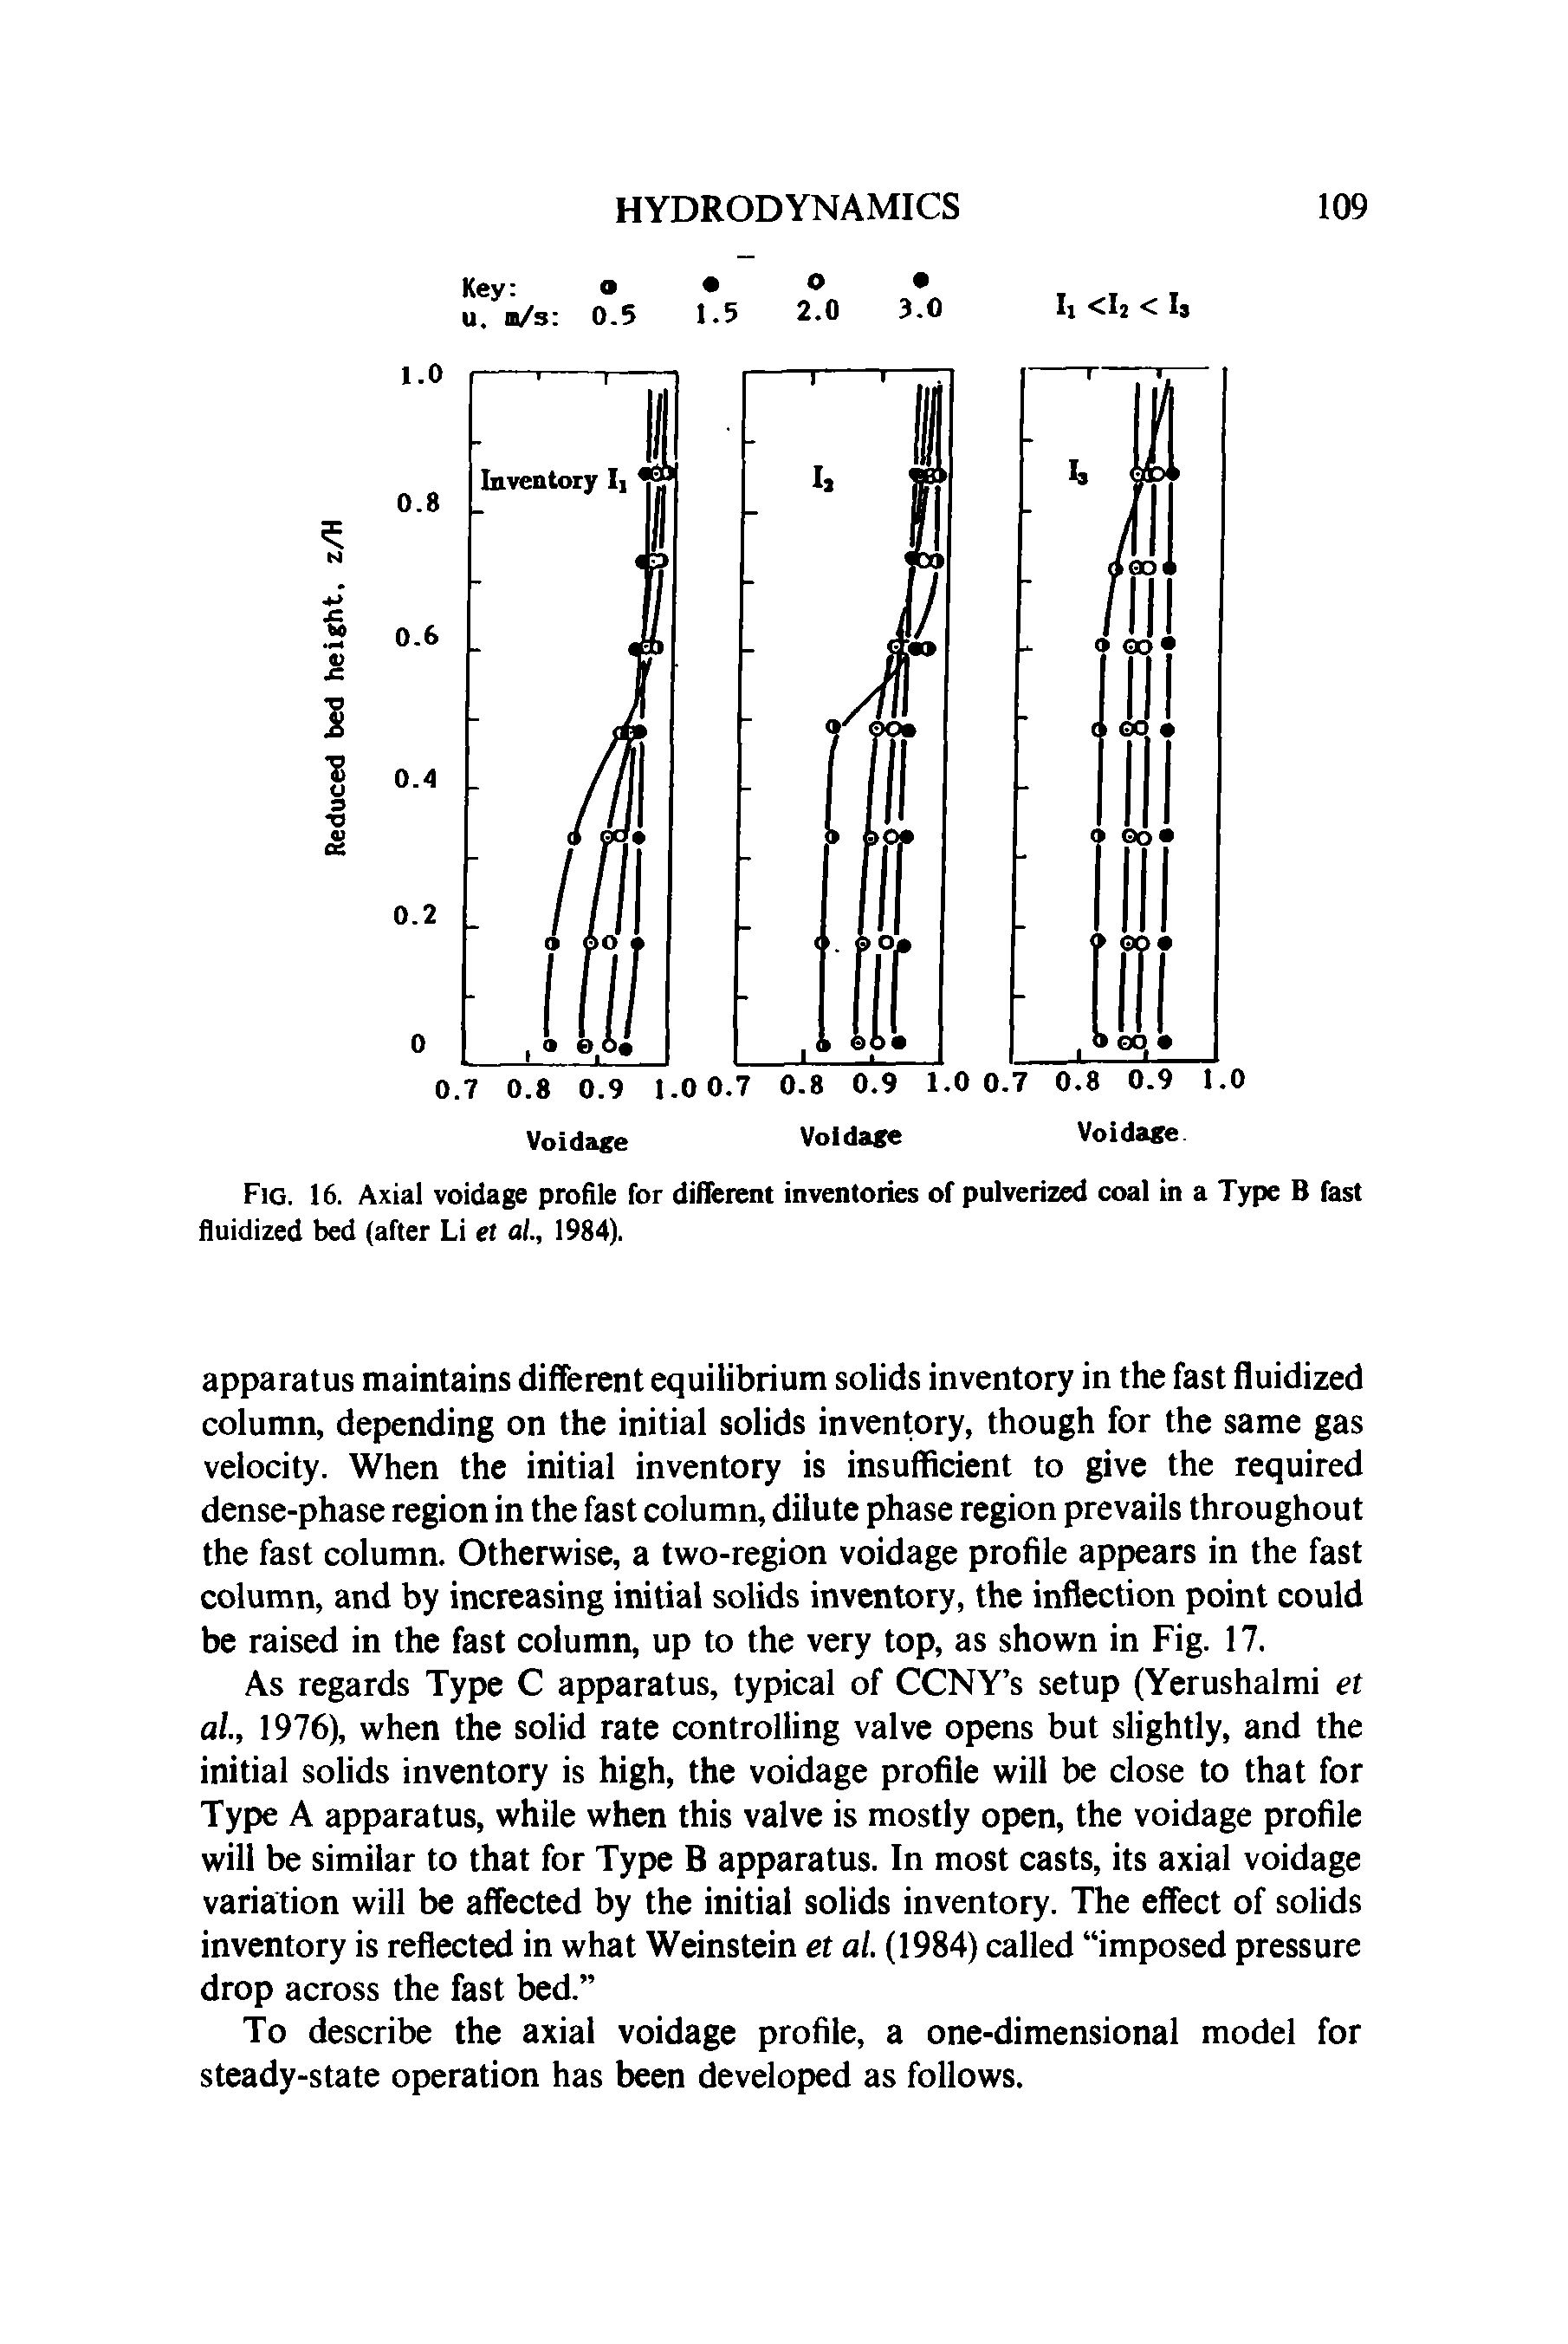 Fig. 16. Axial voidage profile for different inventories of pulverized coal in a Type B fast fluidized bed (after Li et al., 1984).